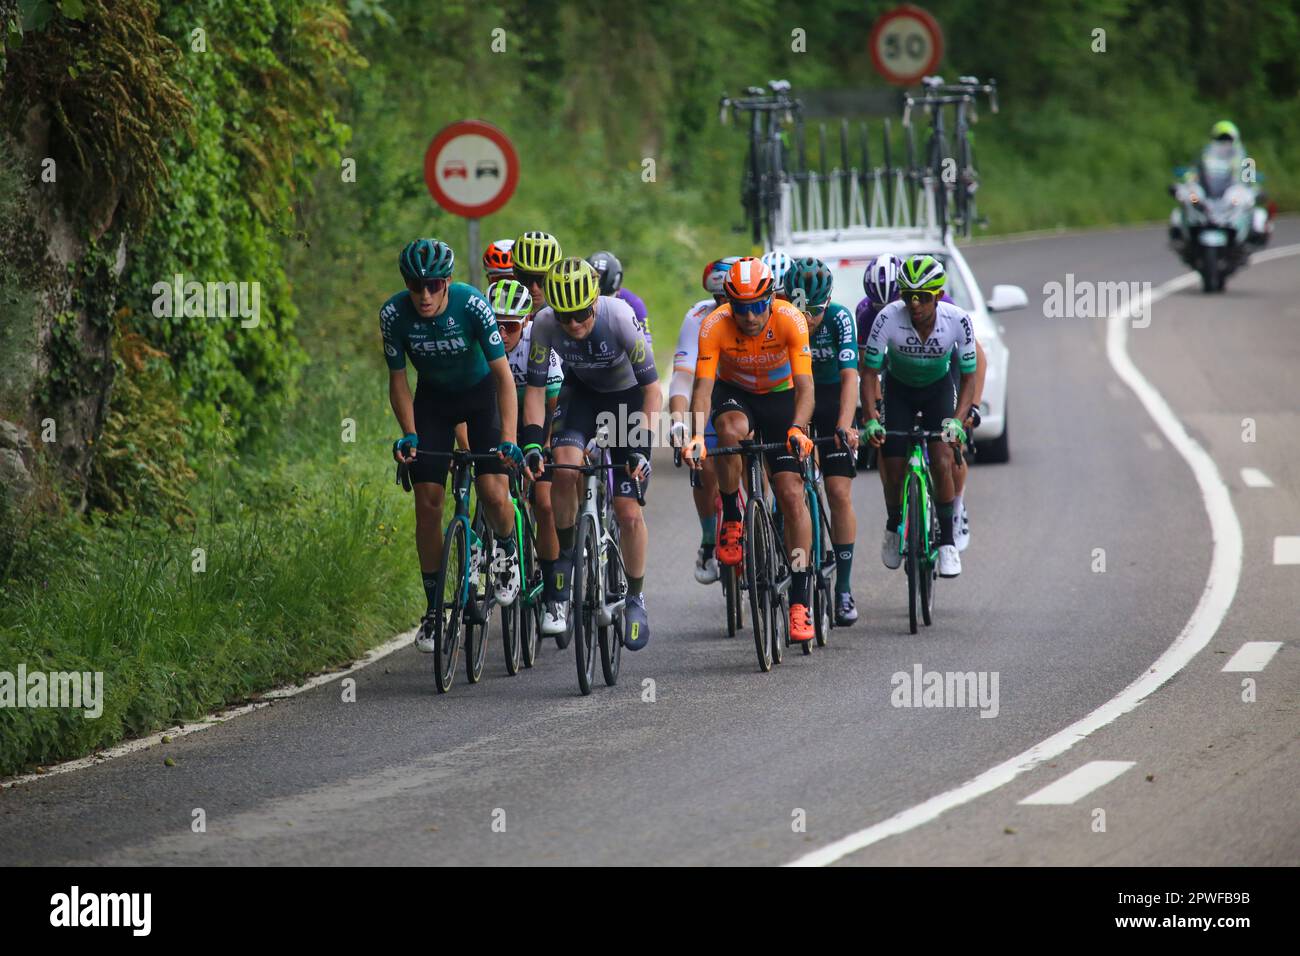 La Rodriga, Spain, 30th April, 2023: The breakaway led by Jon Agirre (Kern Pharma Team, L) and Carl Fredrik Hagen (Q36.5 Pro Cycling Team, R) during the 3rd stage of the Vuelta a Asturias 2023 between Cangas del Narcea and Oviedo, on April 30, 2023, in La Rodriga, Spain. Credit: Alberto Brevers / Alamy Live News Stock Photo